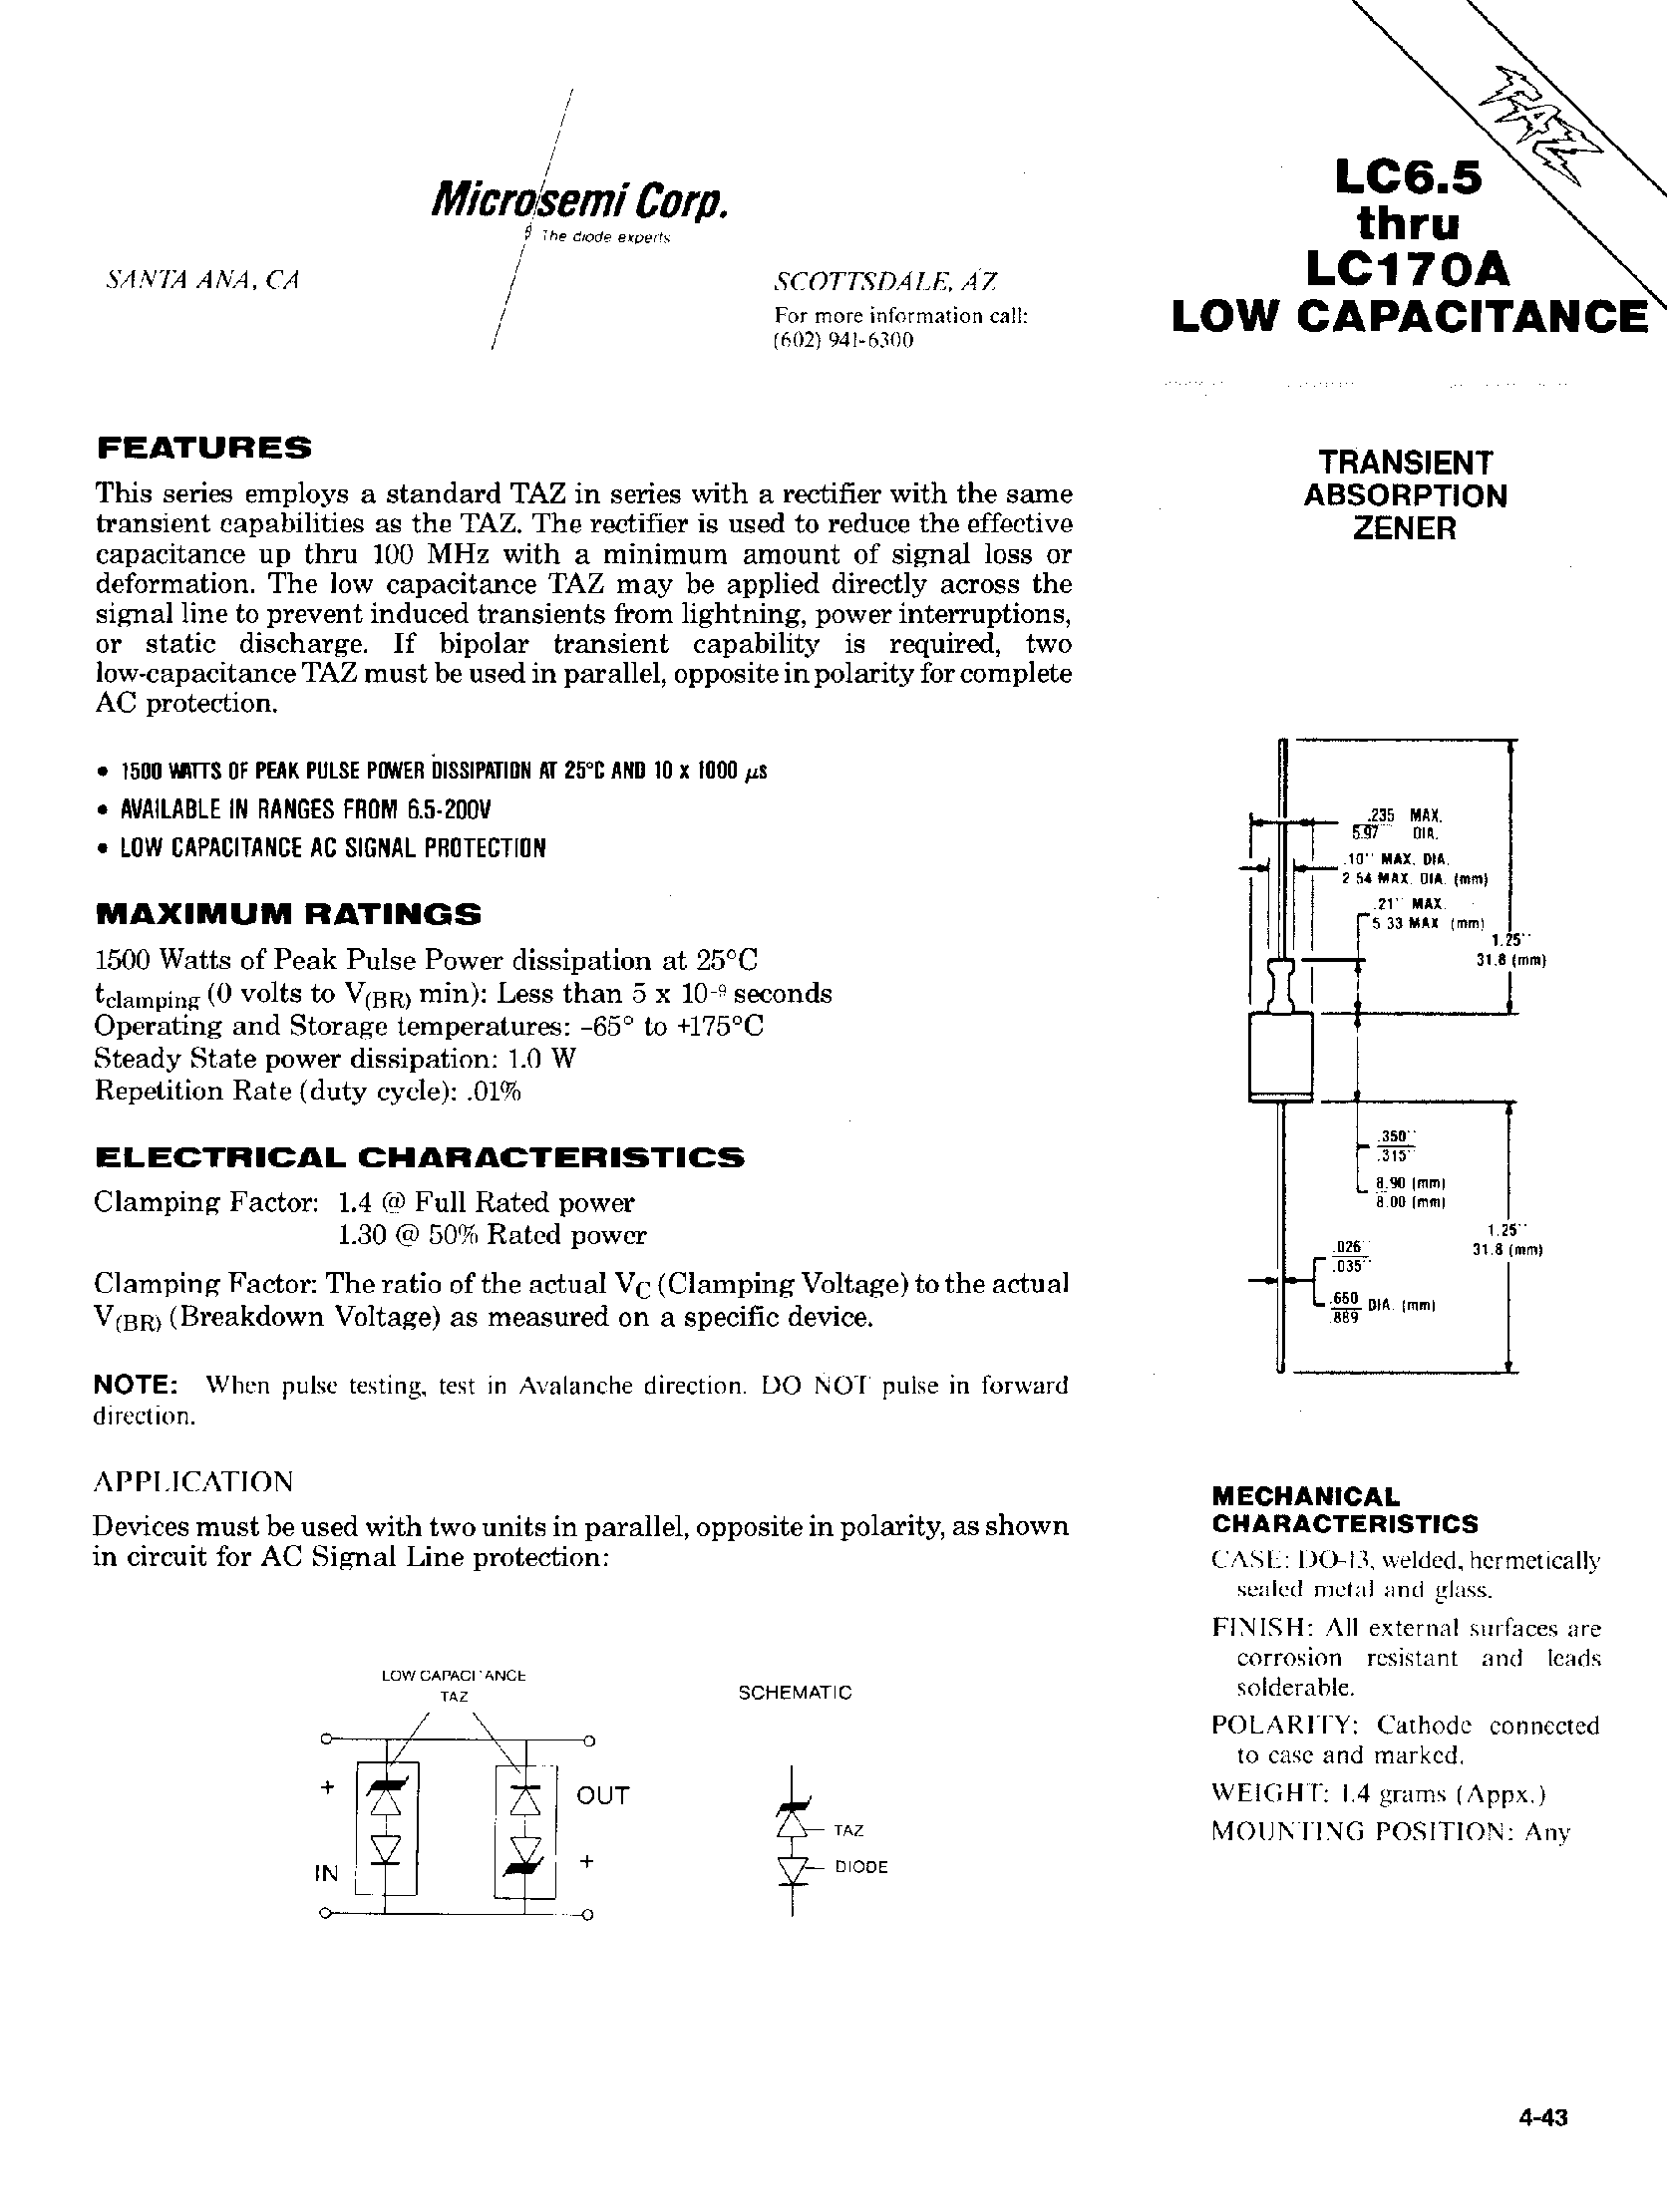 Datasheet LC20 - TRANSIENT ABSORPTION ZENER page 1